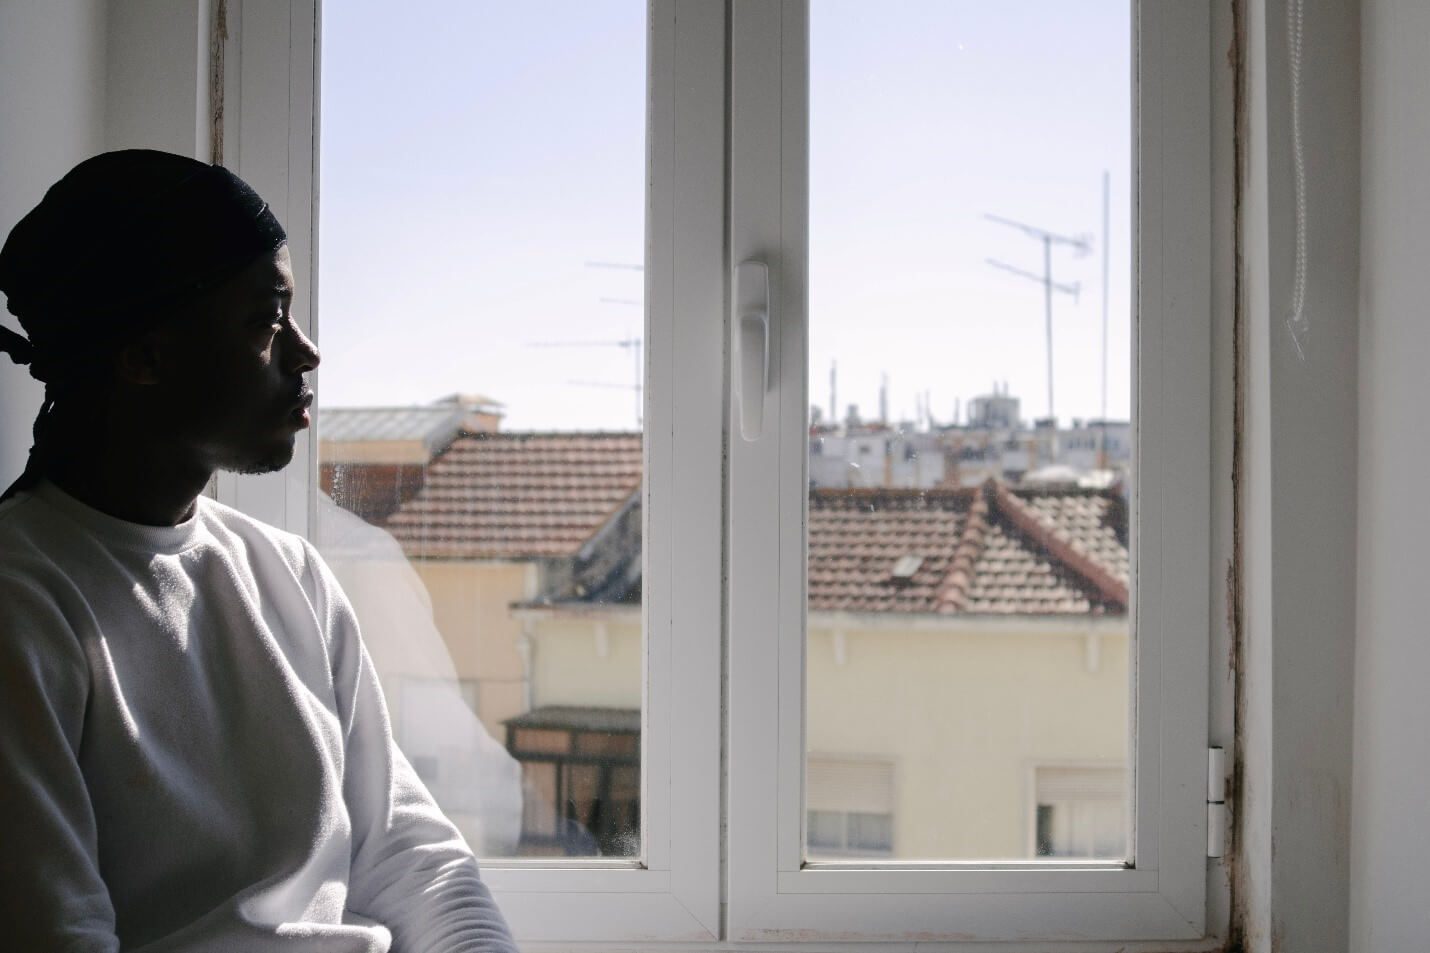 A Black man stares out a window.